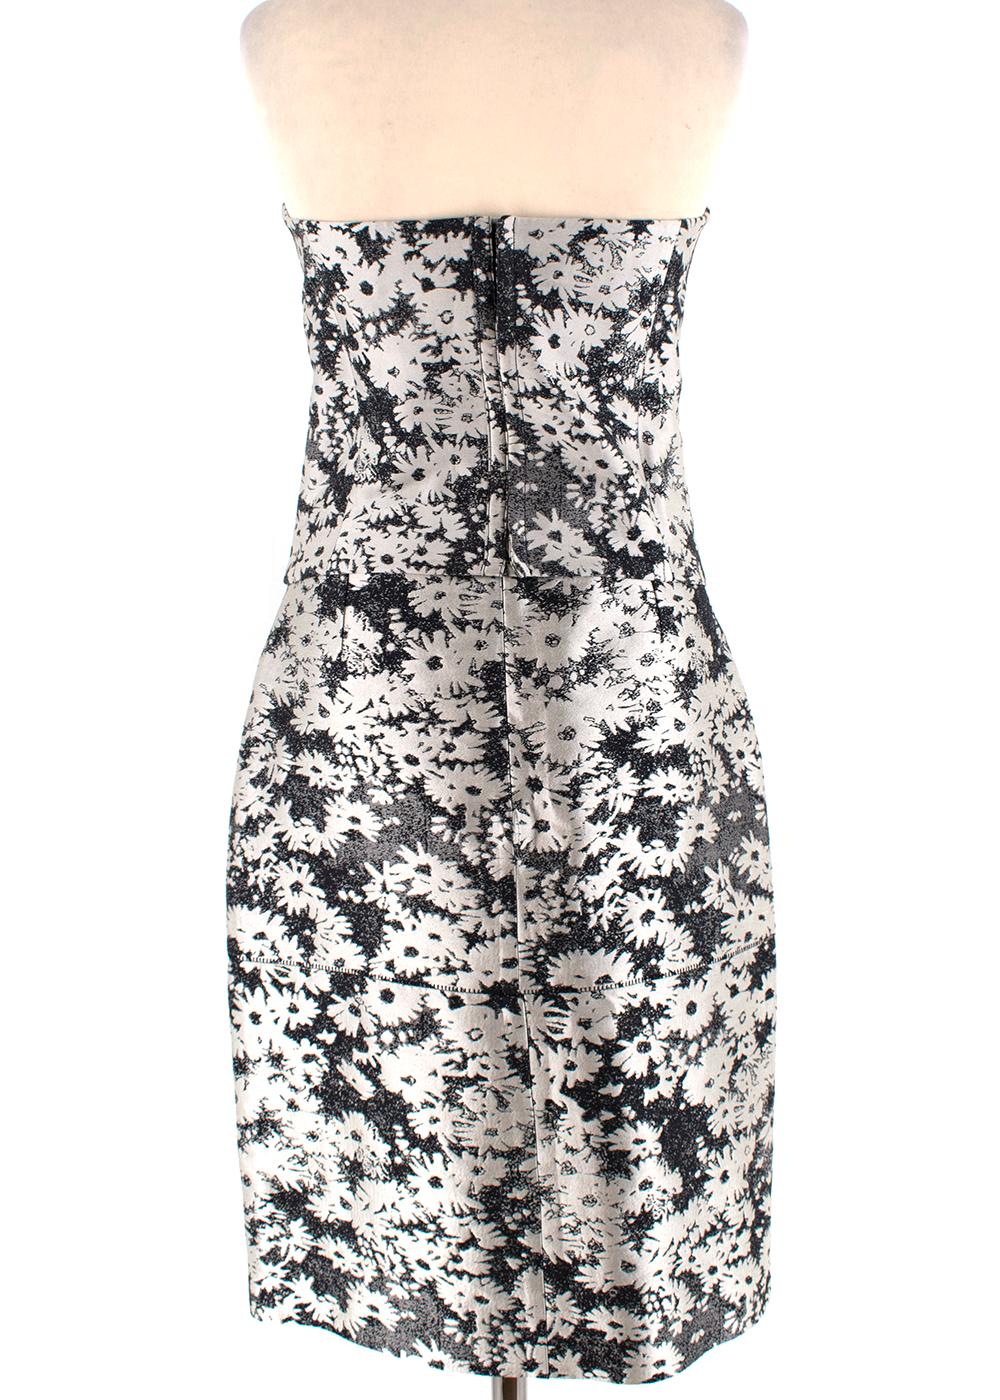 Stella McCartney Jcquard Floral Print Top and Skirt 

-Beautiful out of focus effect jacquard floral print 
-Luxurious silky satin like texture 
Top:
-Corset like strapless top
-Fully lined 
-Hook fastening to the back with 2 sizes 
Skirt:
-Slit to